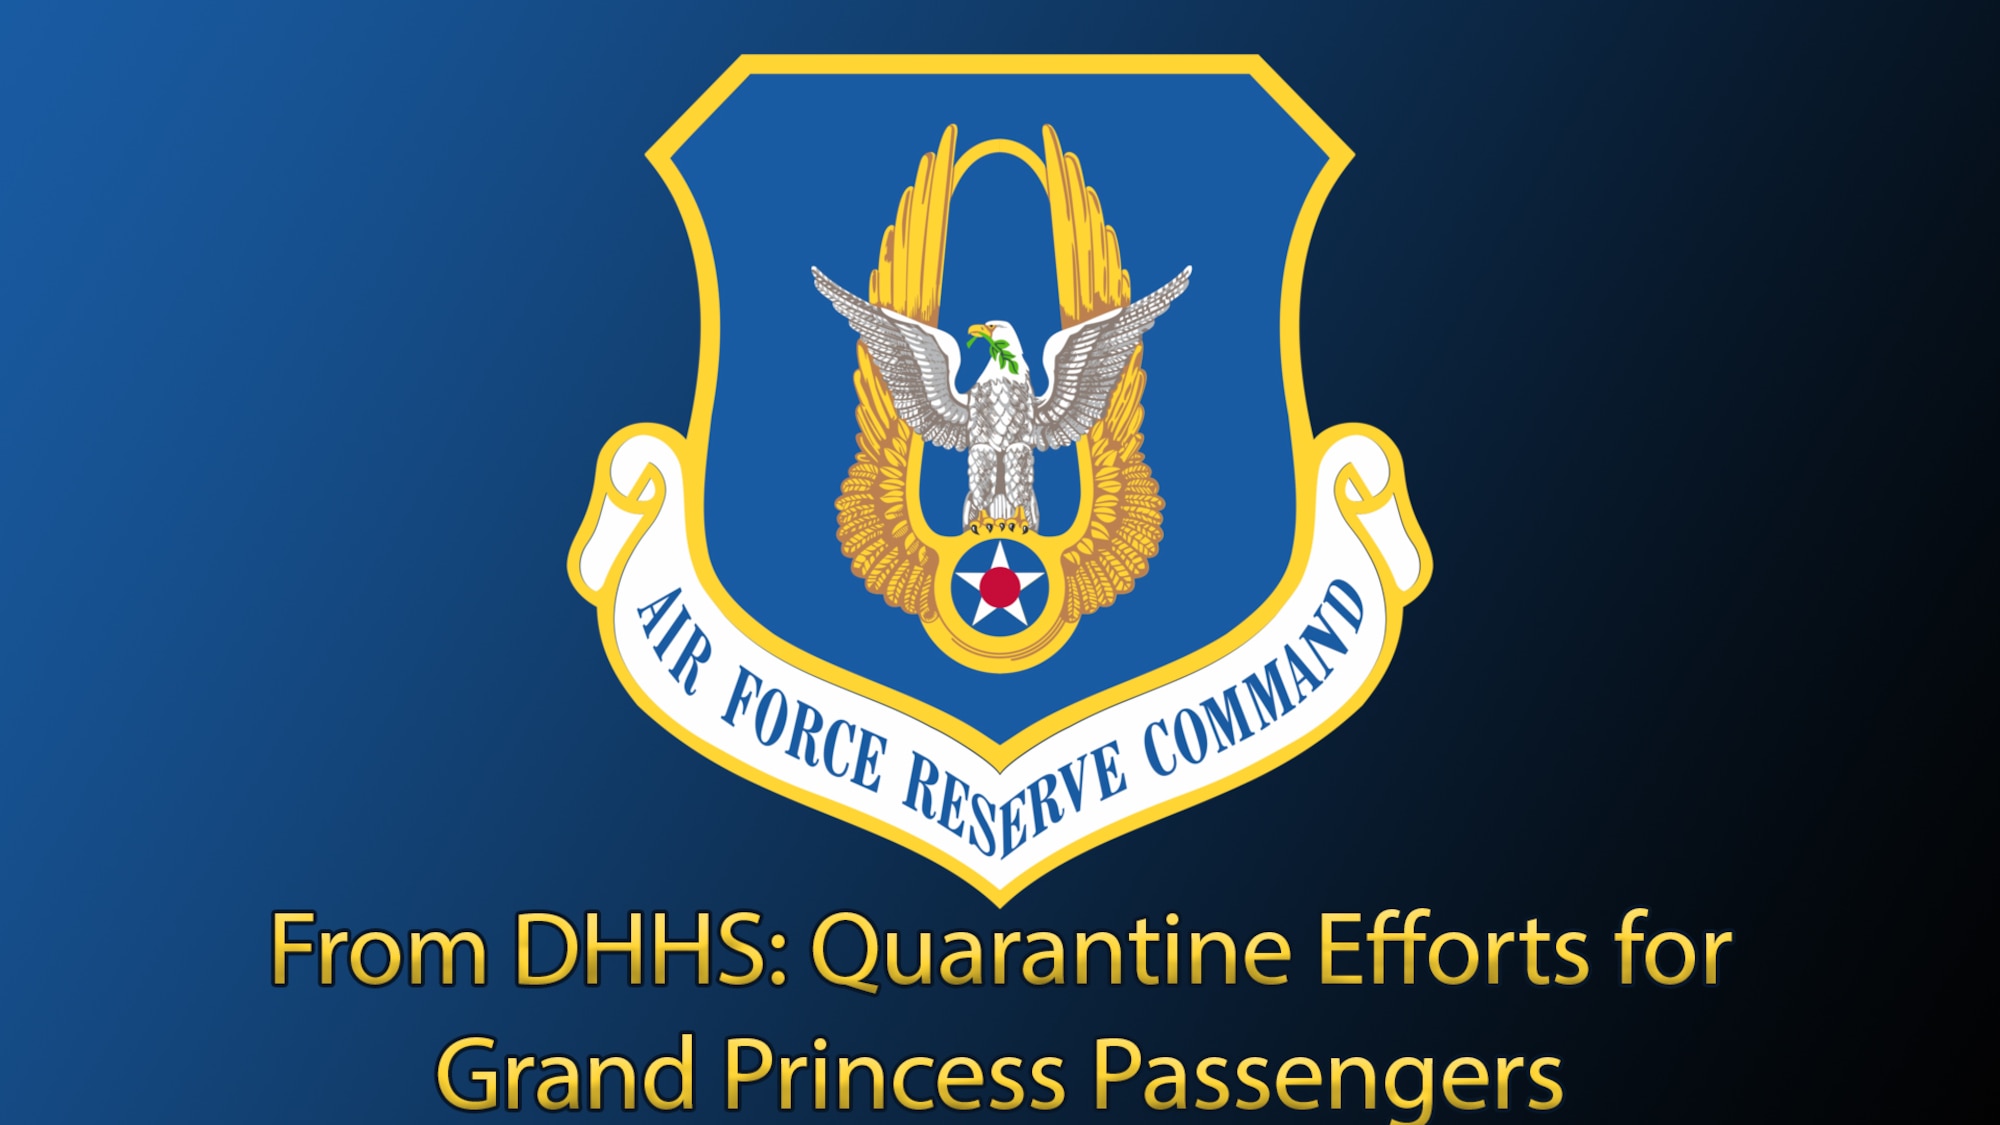 Graphic with AFRC shield and text that reads From DHHS: Quarantine Efforts for Grand Princess Passengers